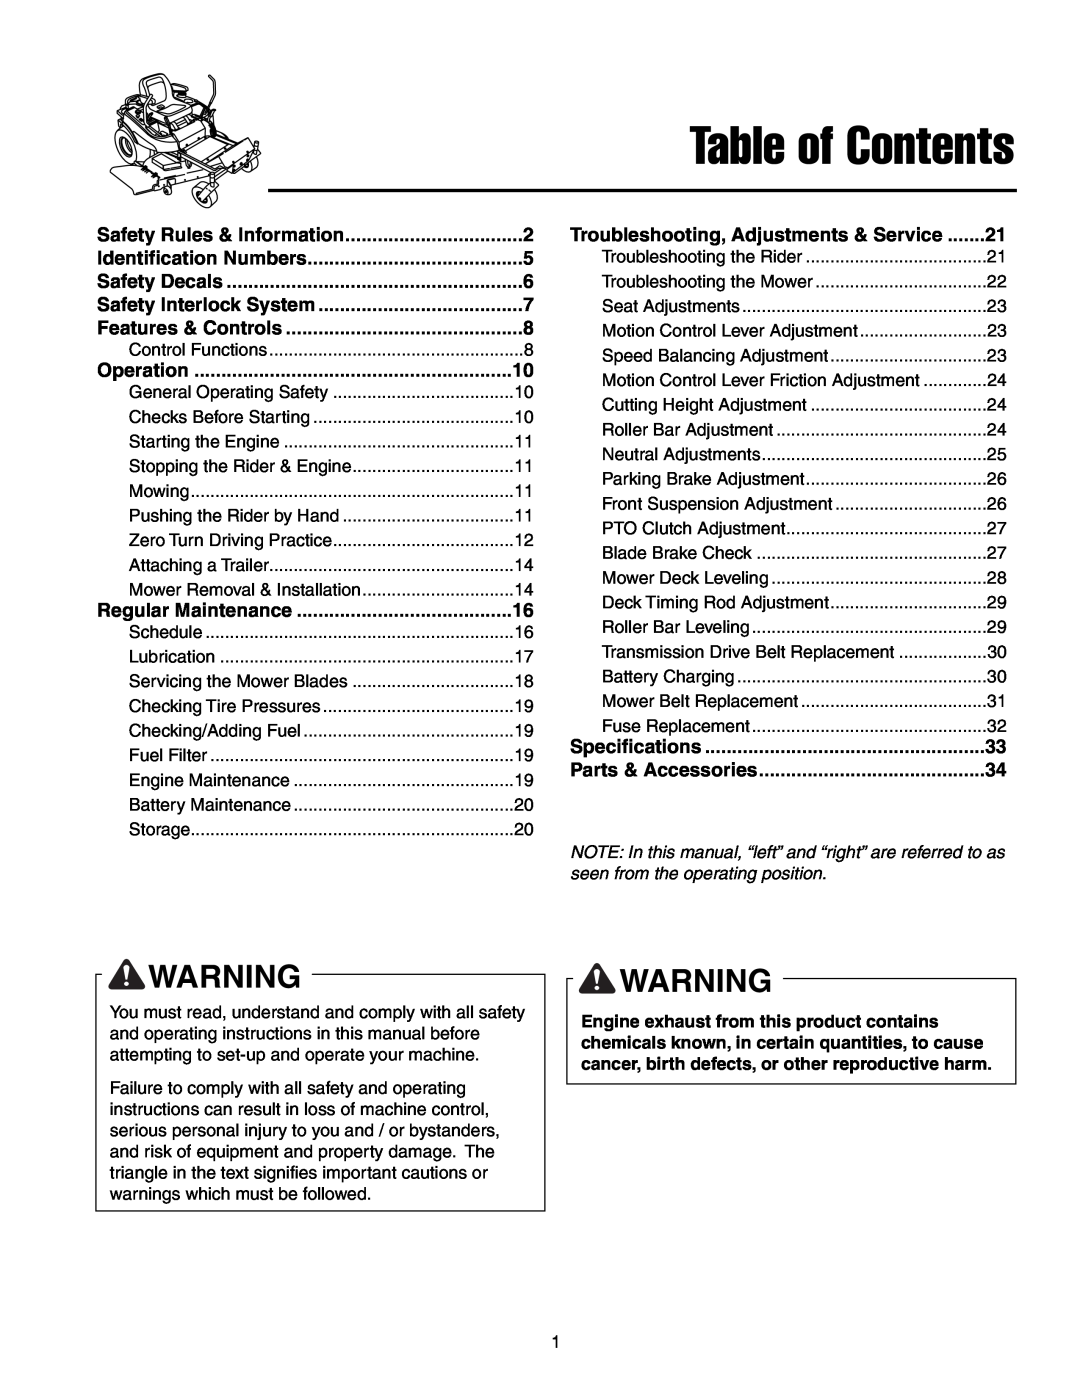 Simplicity 250 Z Table of Contents, Operation, Regular Maintenance, Troubleshooting, Adjustments & Service, Safety Decals 